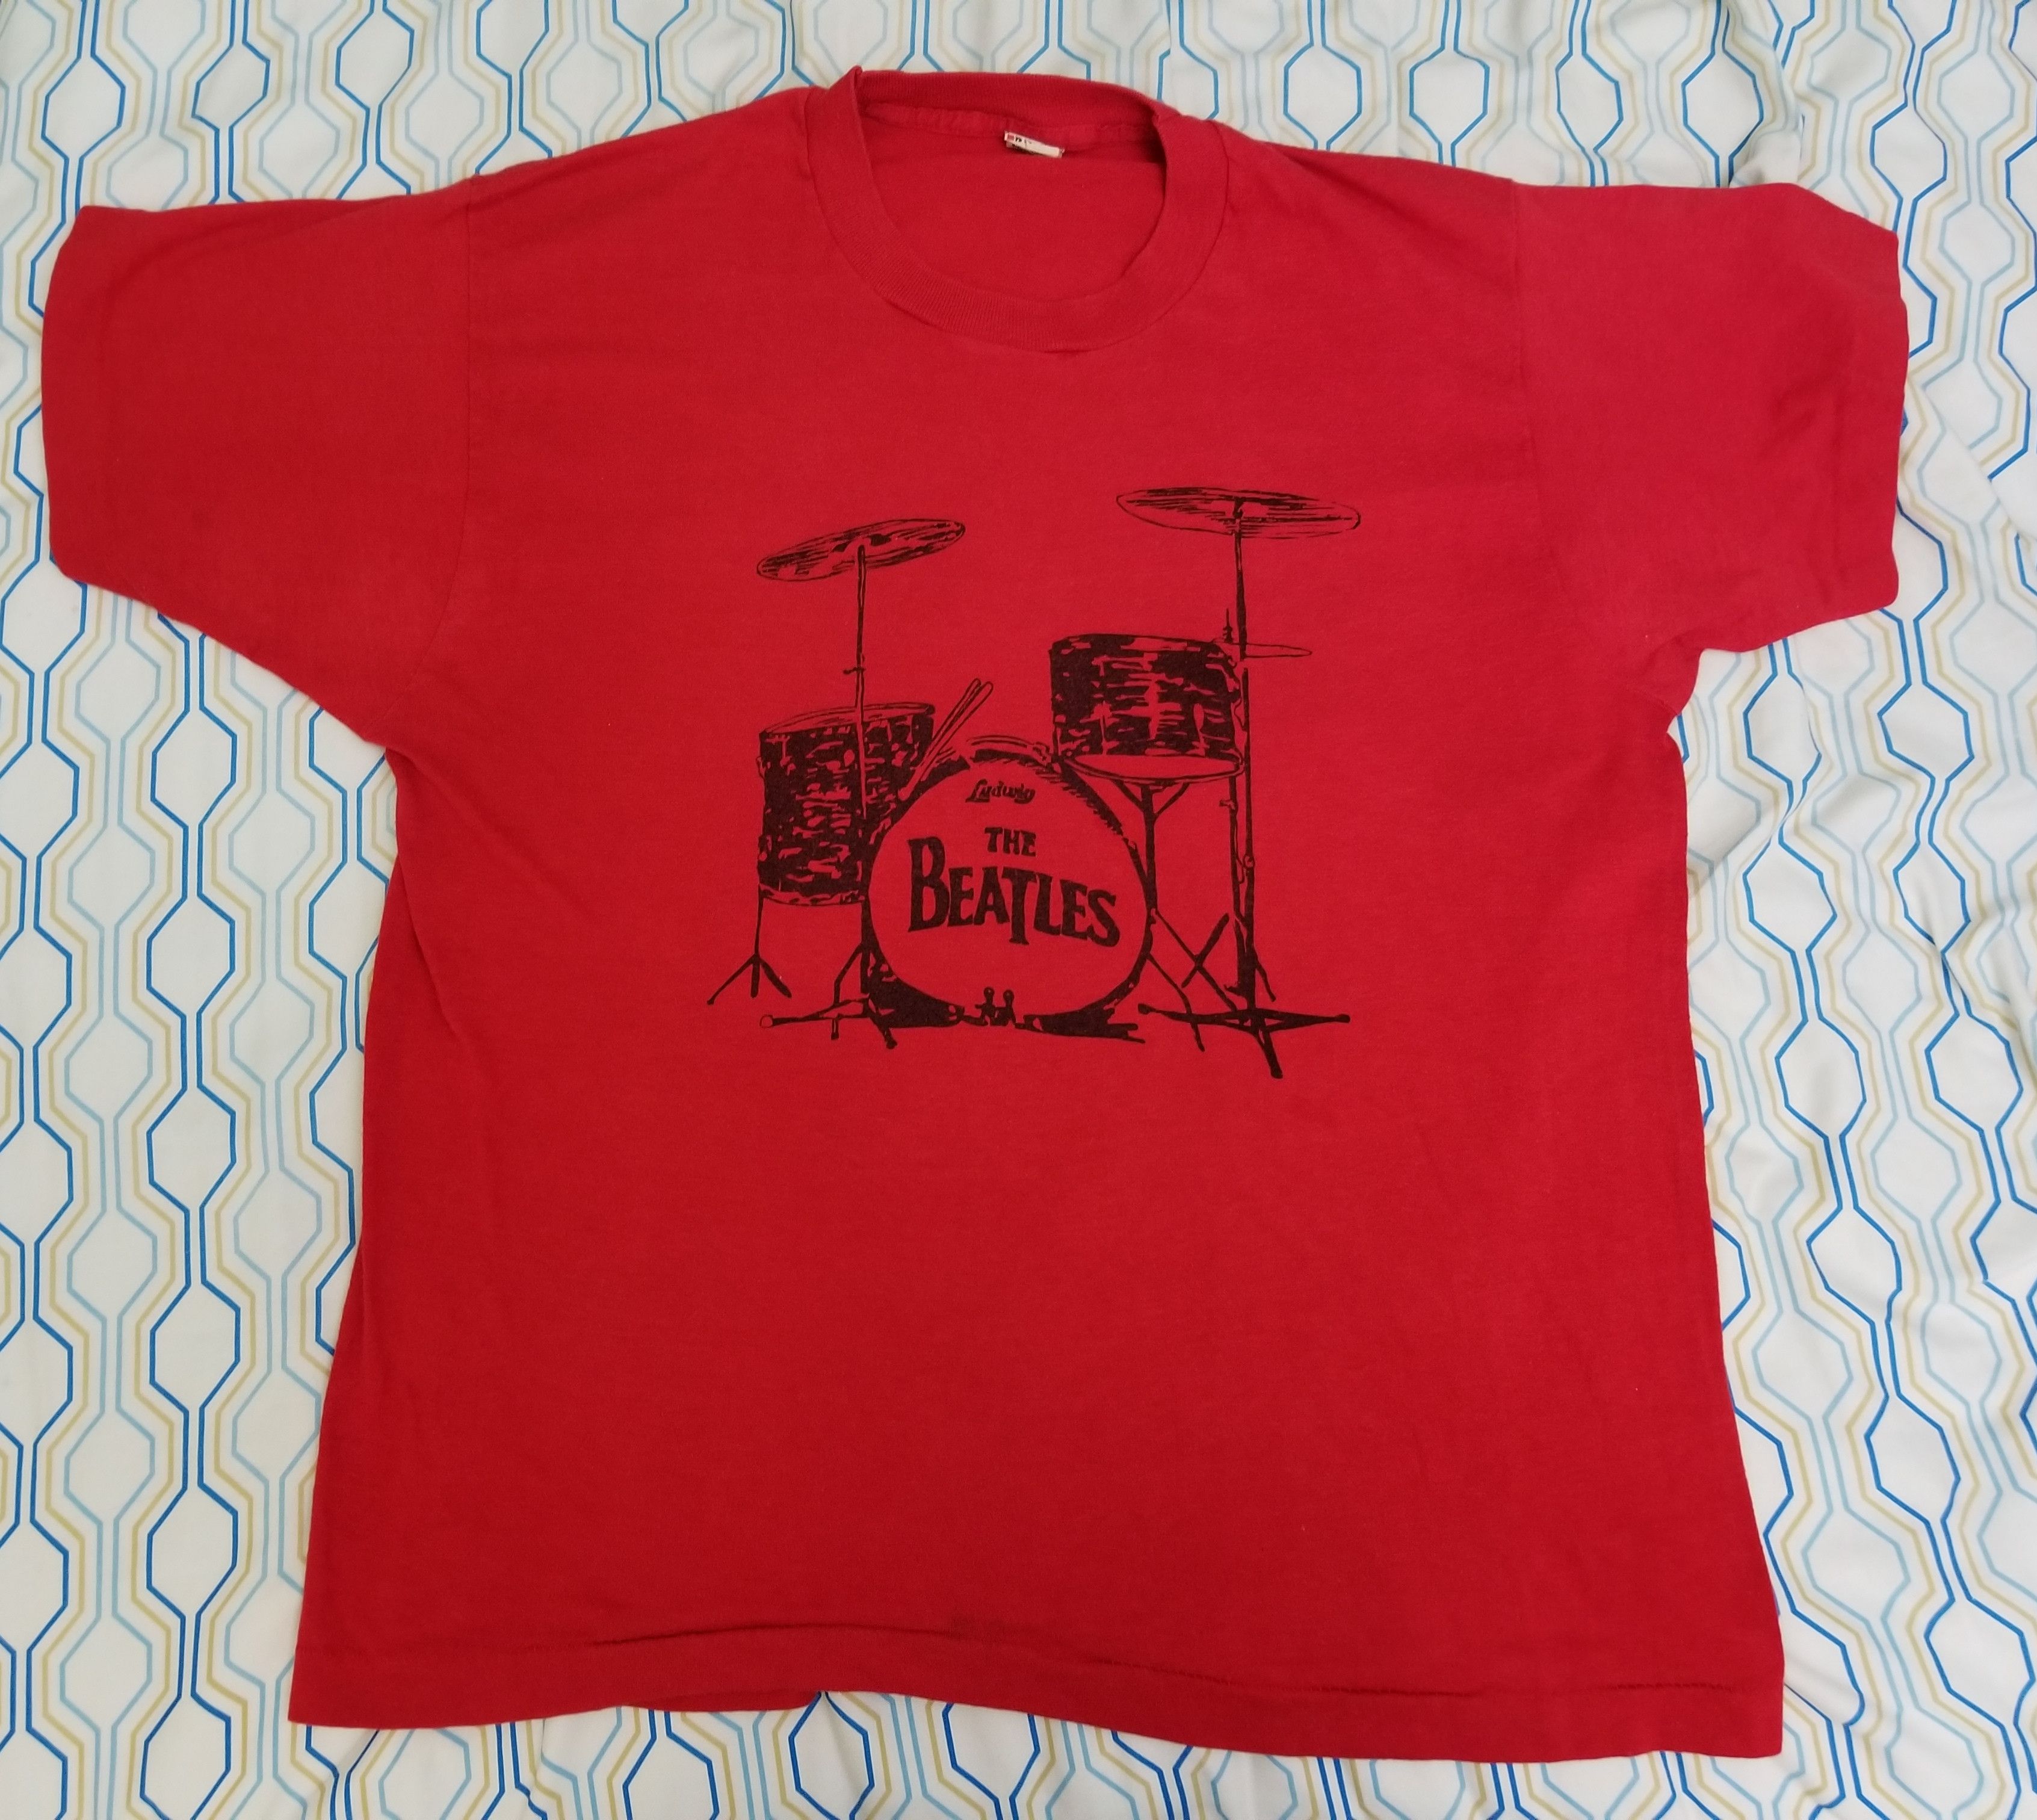 Vintage Vintage 80s The Beatles Drums T Shirt Ludwig Band Red Size US M / EU 48-50 / 2 - 3 Thumbnail